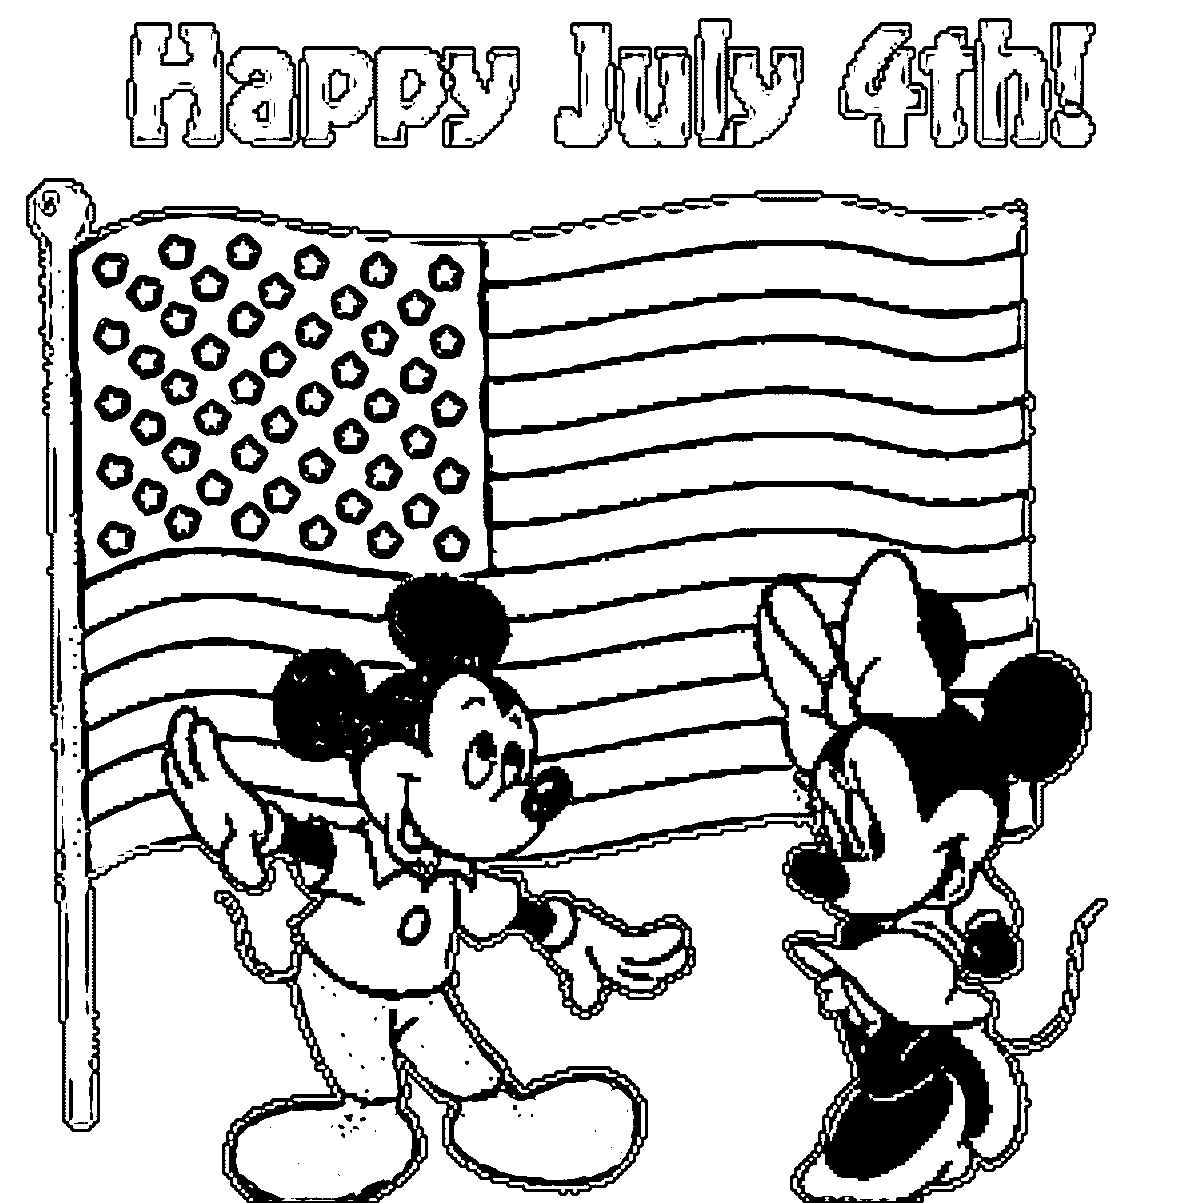 Printable Fourth Of July Coloring Pages